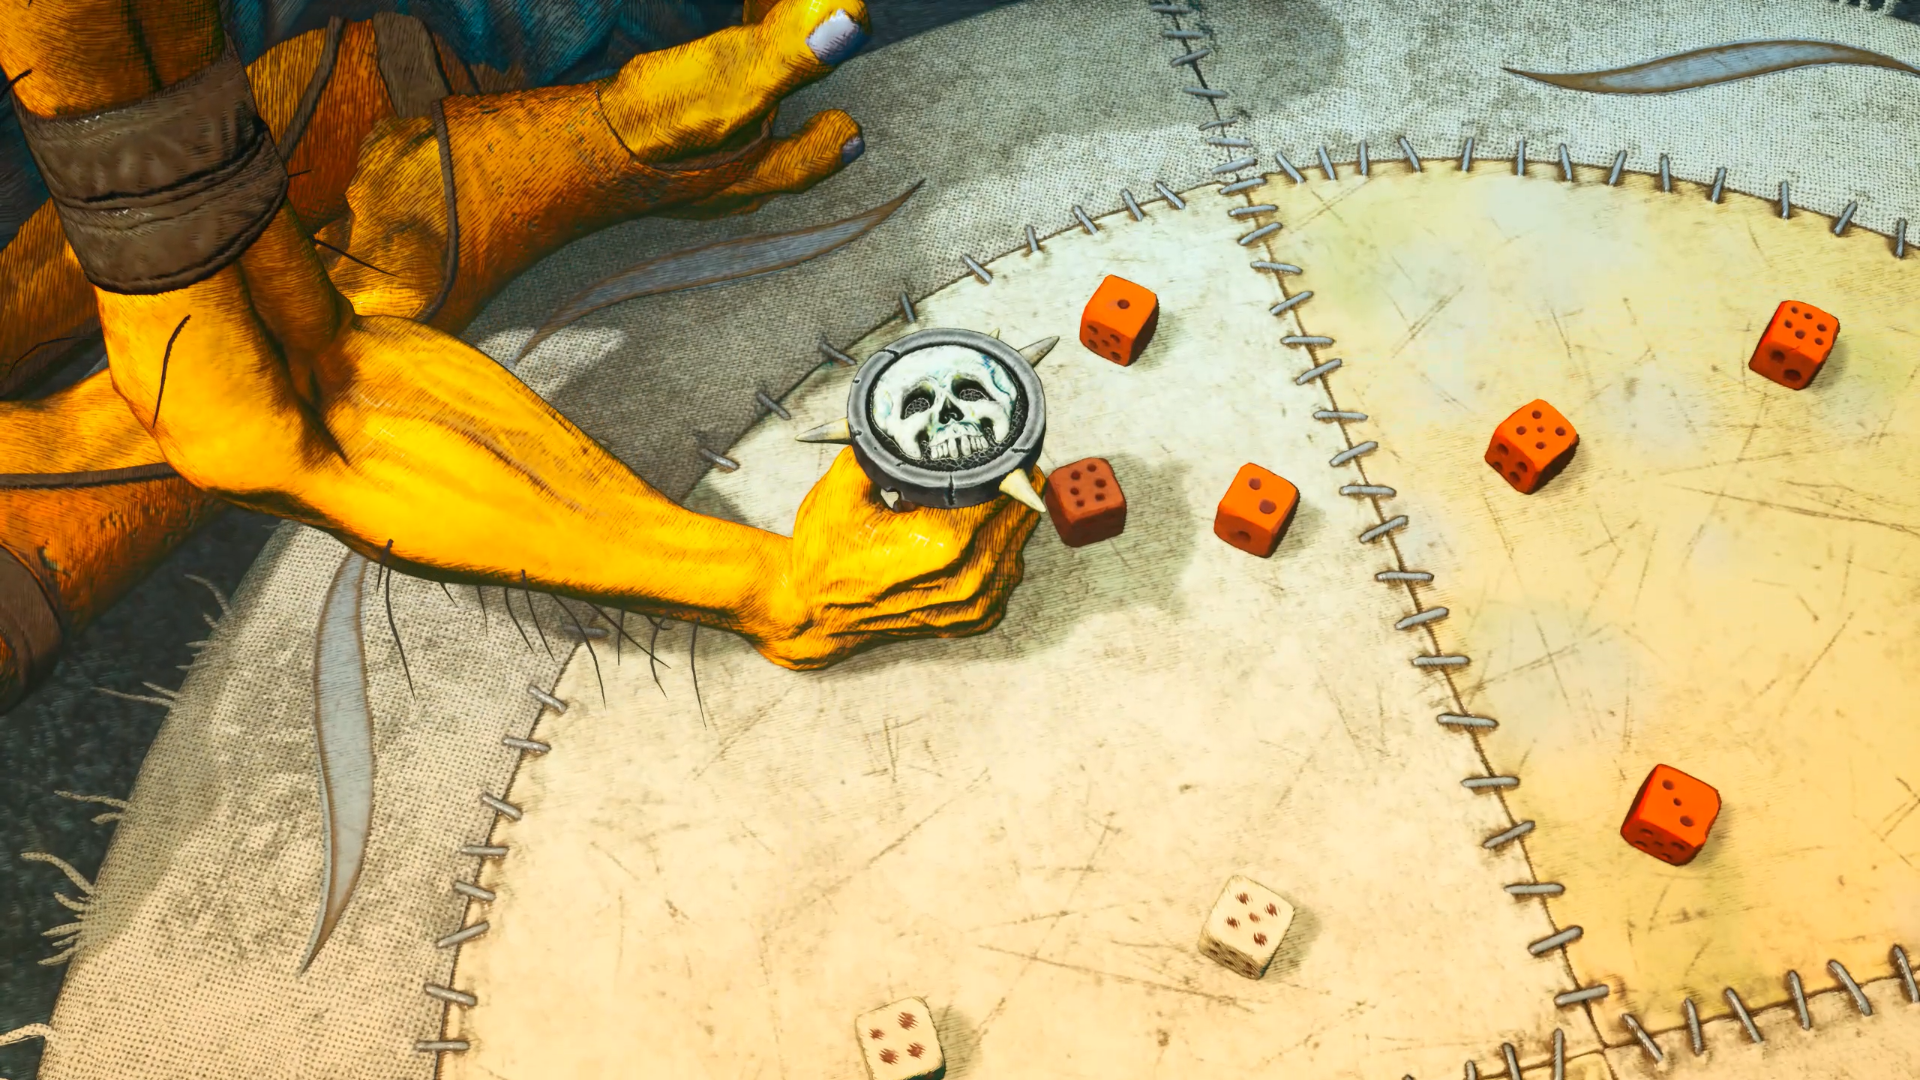 A ritual dice game played before battles in Clash: Artifacts of Chaos.